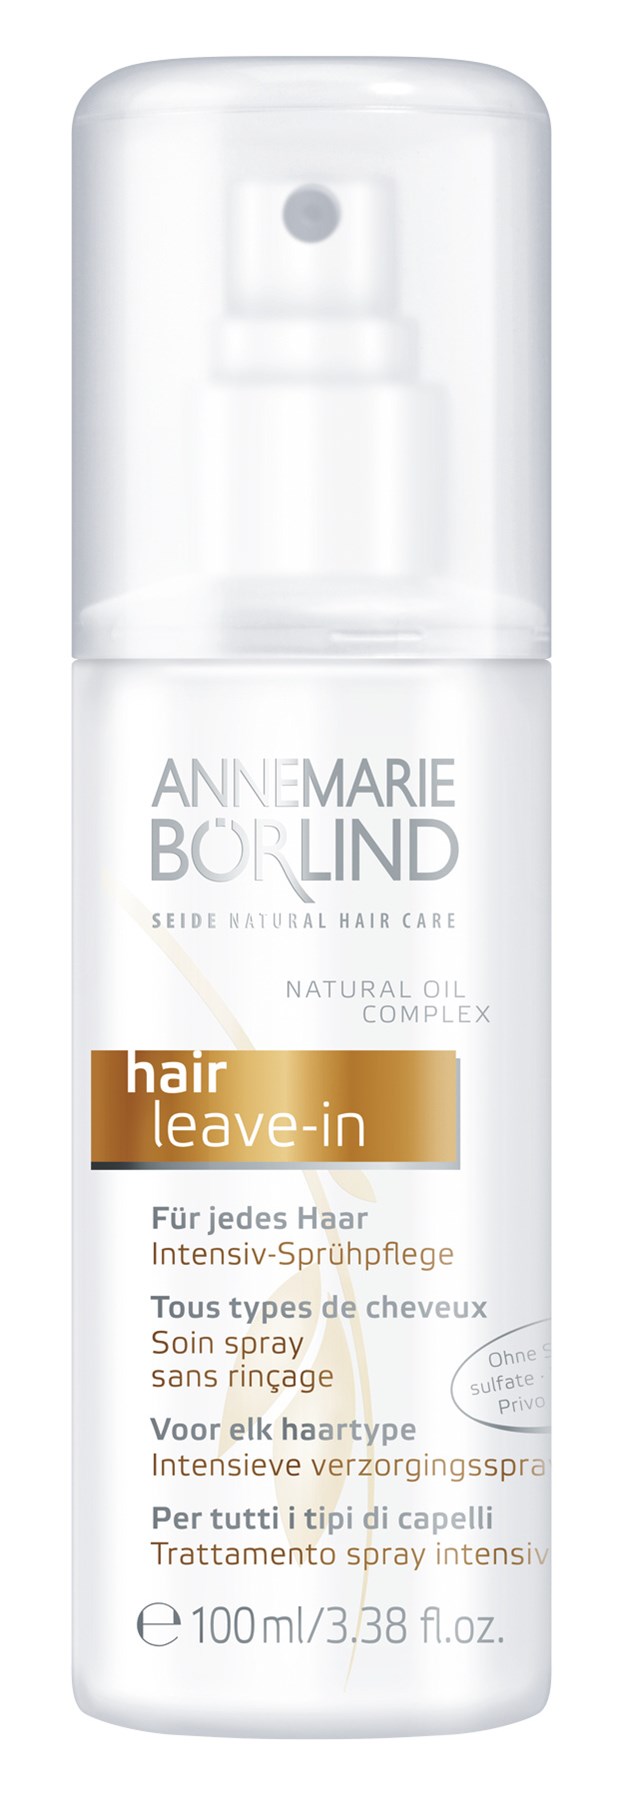 Natural Hair Care Hair Leave-in